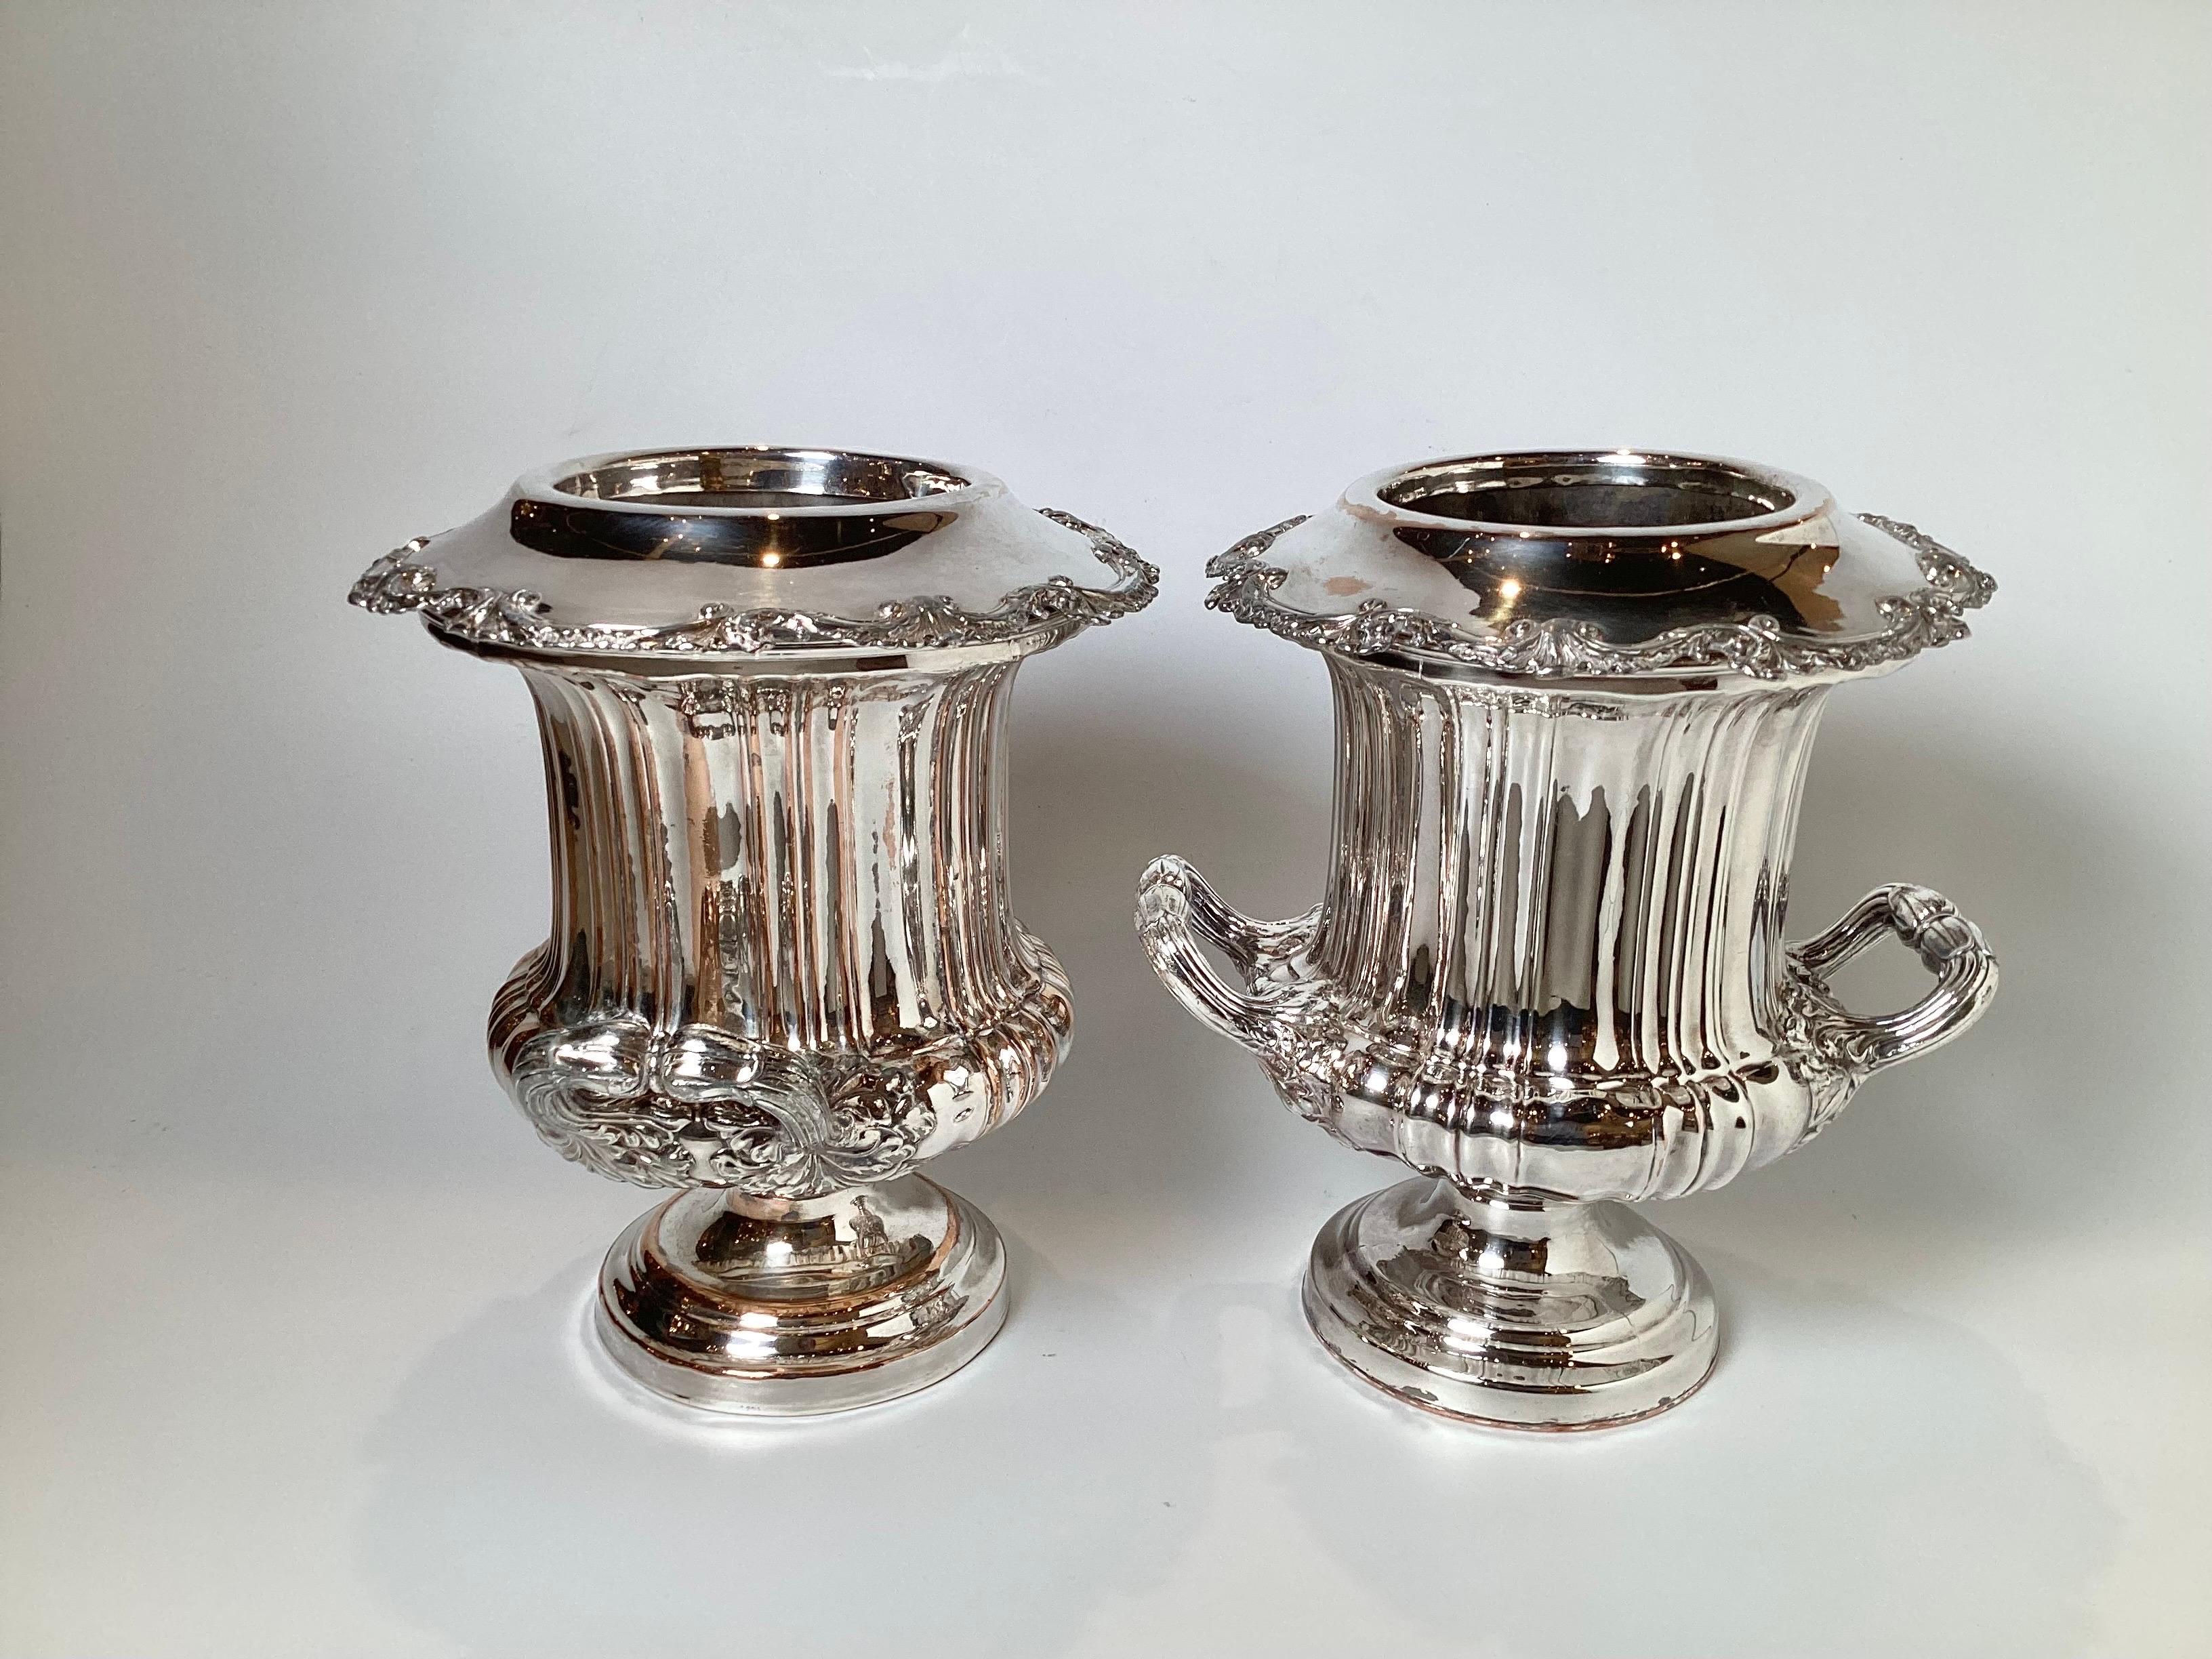 Pair of Silver Plated Copper Campana Urn Champaigne Coolers In Good Condition For Sale In Lambertville, NJ